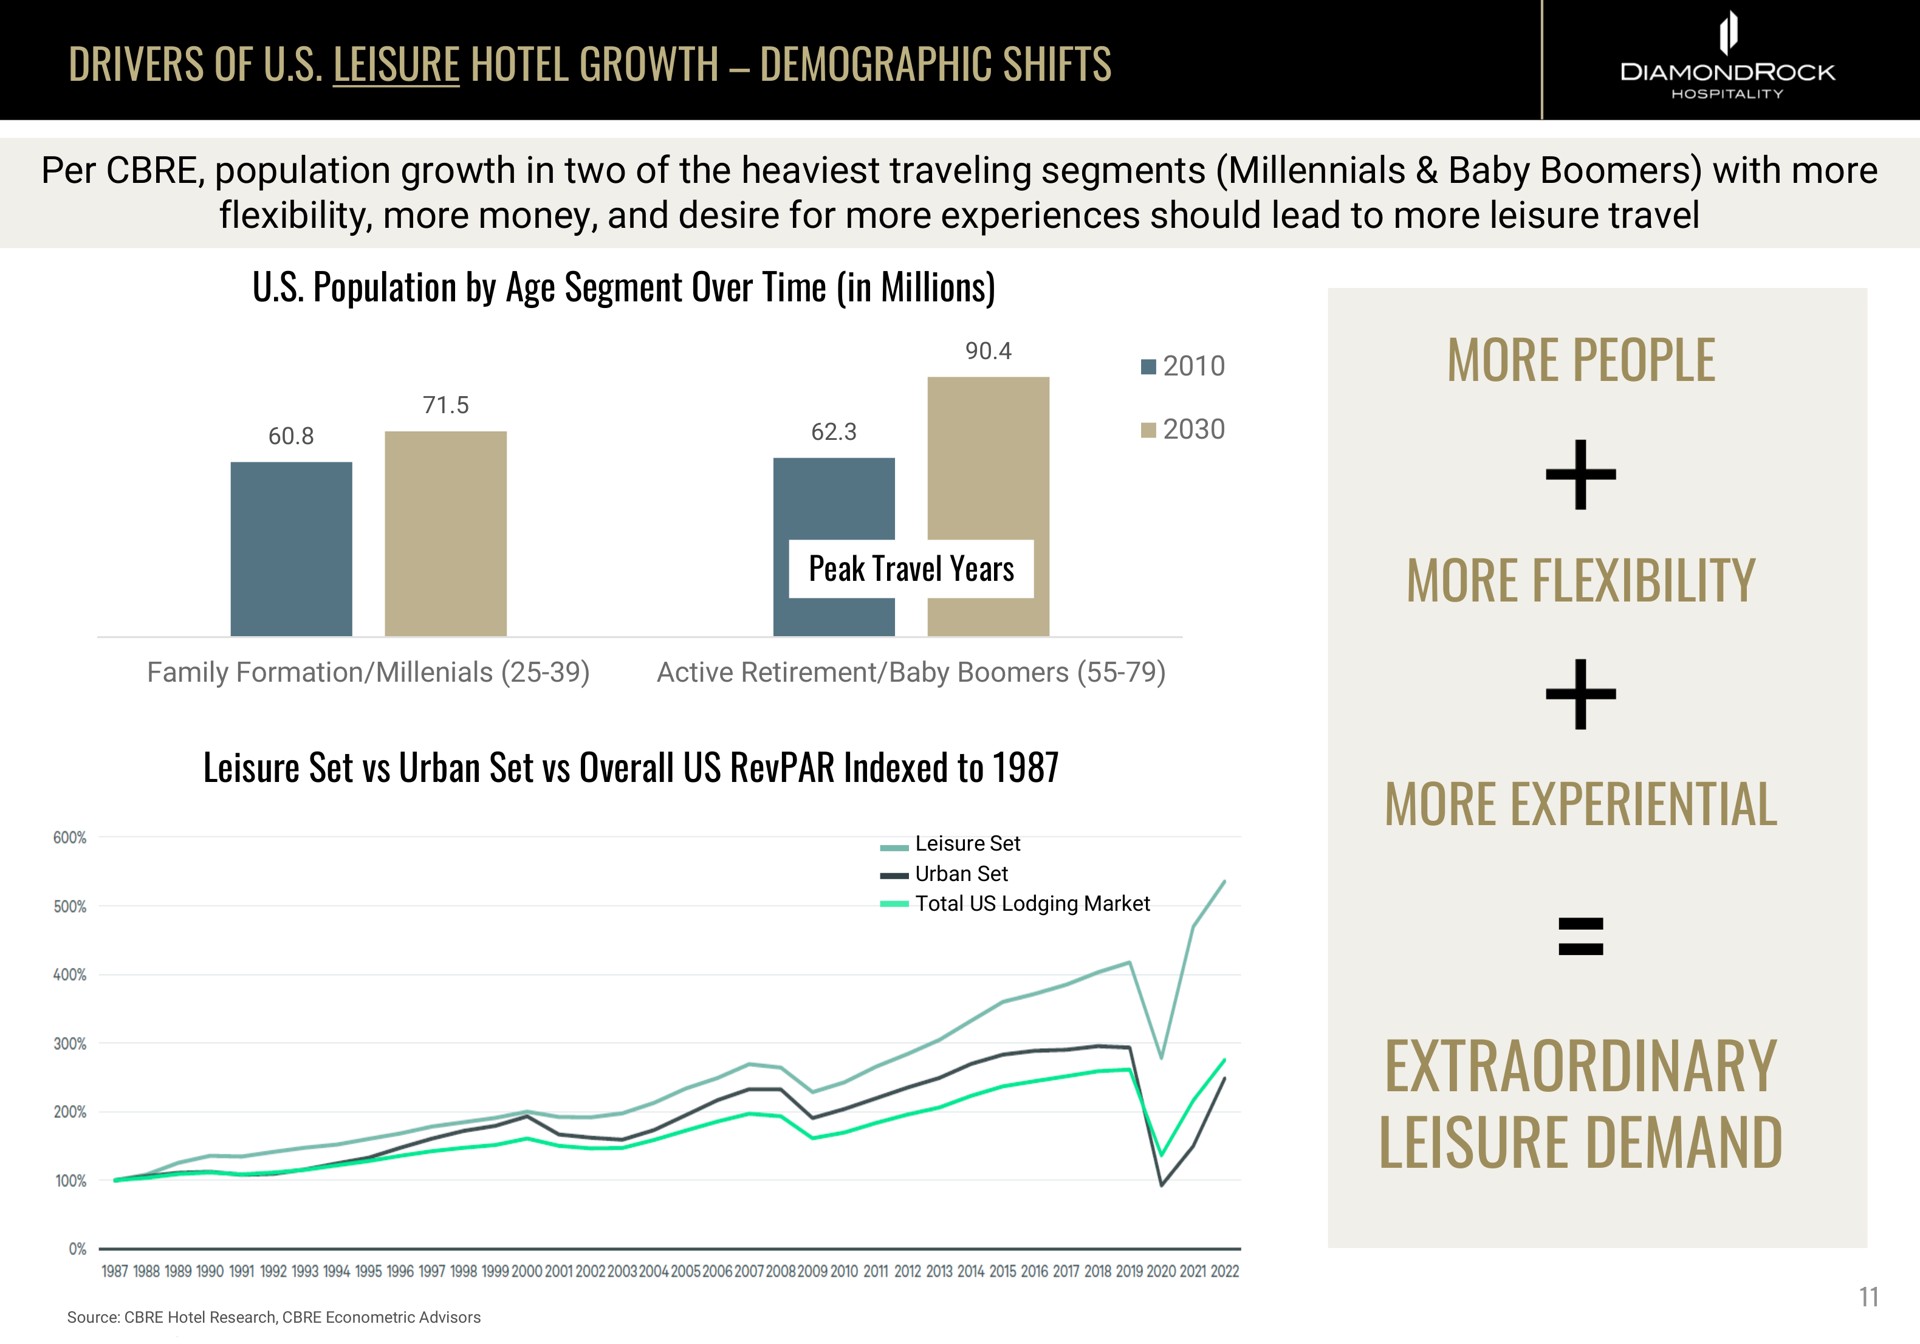 drivers of leisure hotel growth demographic shifts per population growth in two of the traveling segments baby boomers with more flexibility more money and desire for more experiences should lead to more leisure travel population by age segment over time in millions more people more flexibility leisure set urban set overall us indexed to more experiential extraordinary leisure demand | DiamondRock Hospitality